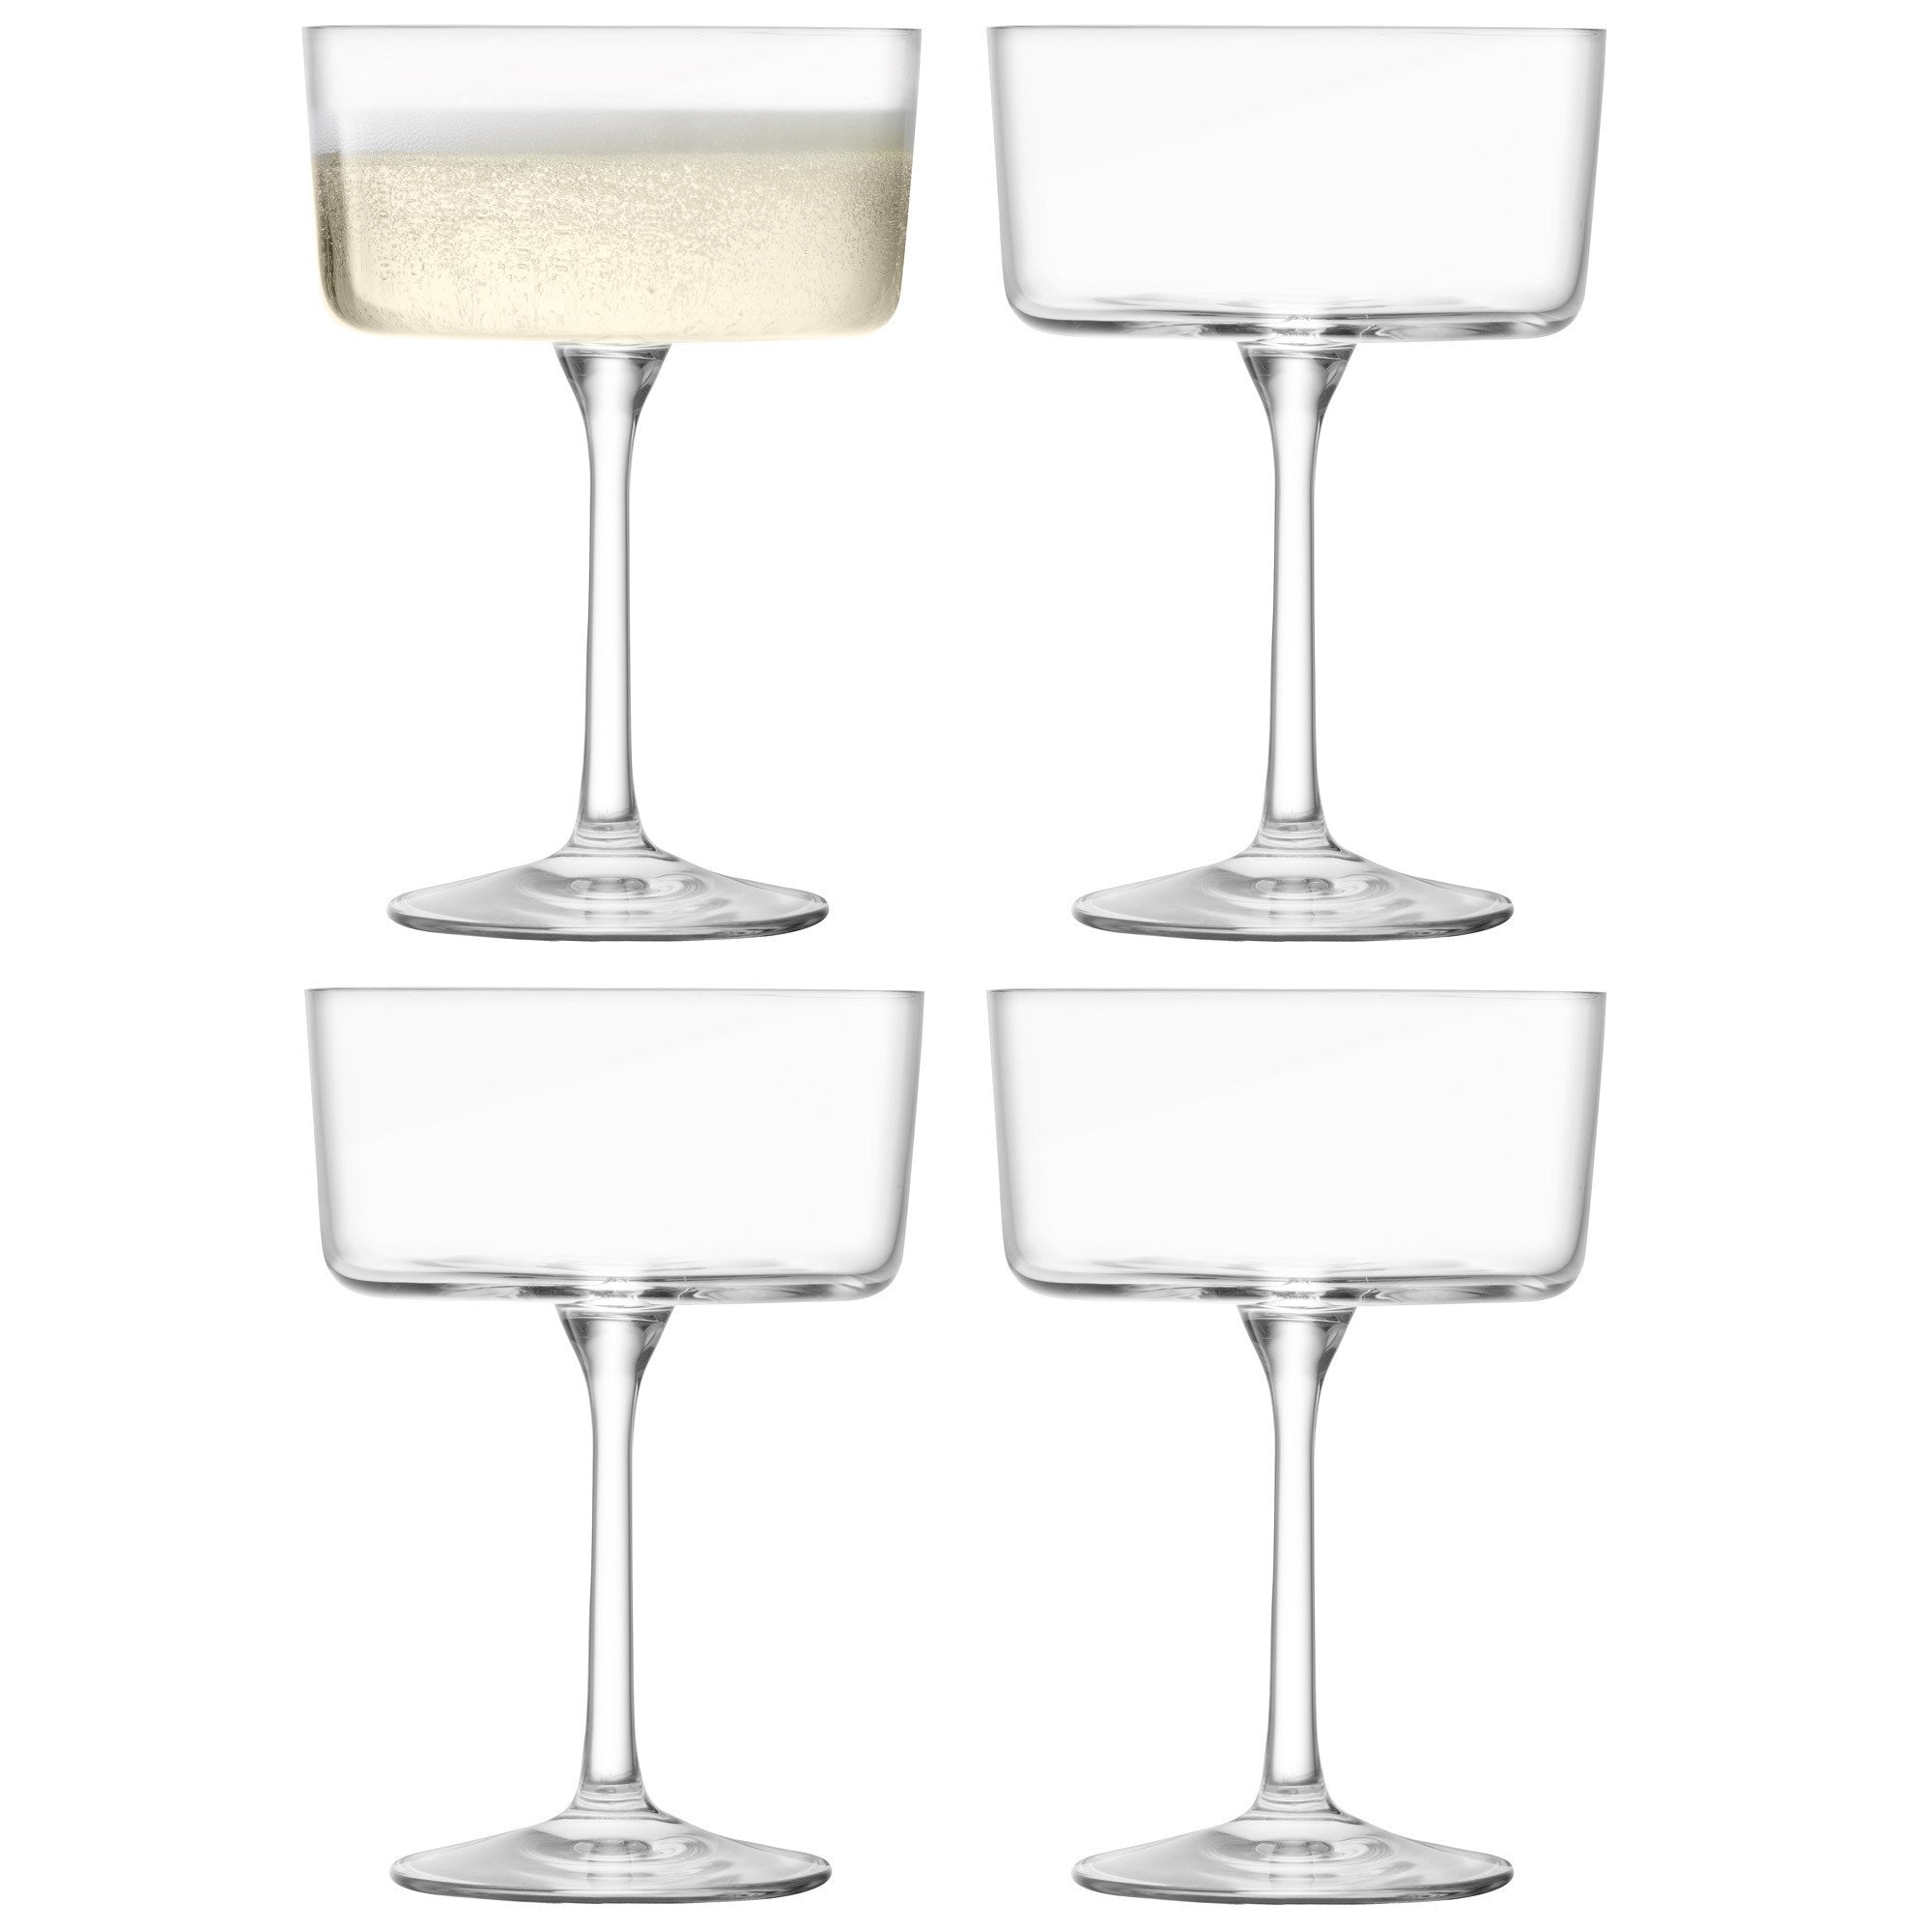 Gio Champagne Coupes - Set of 4